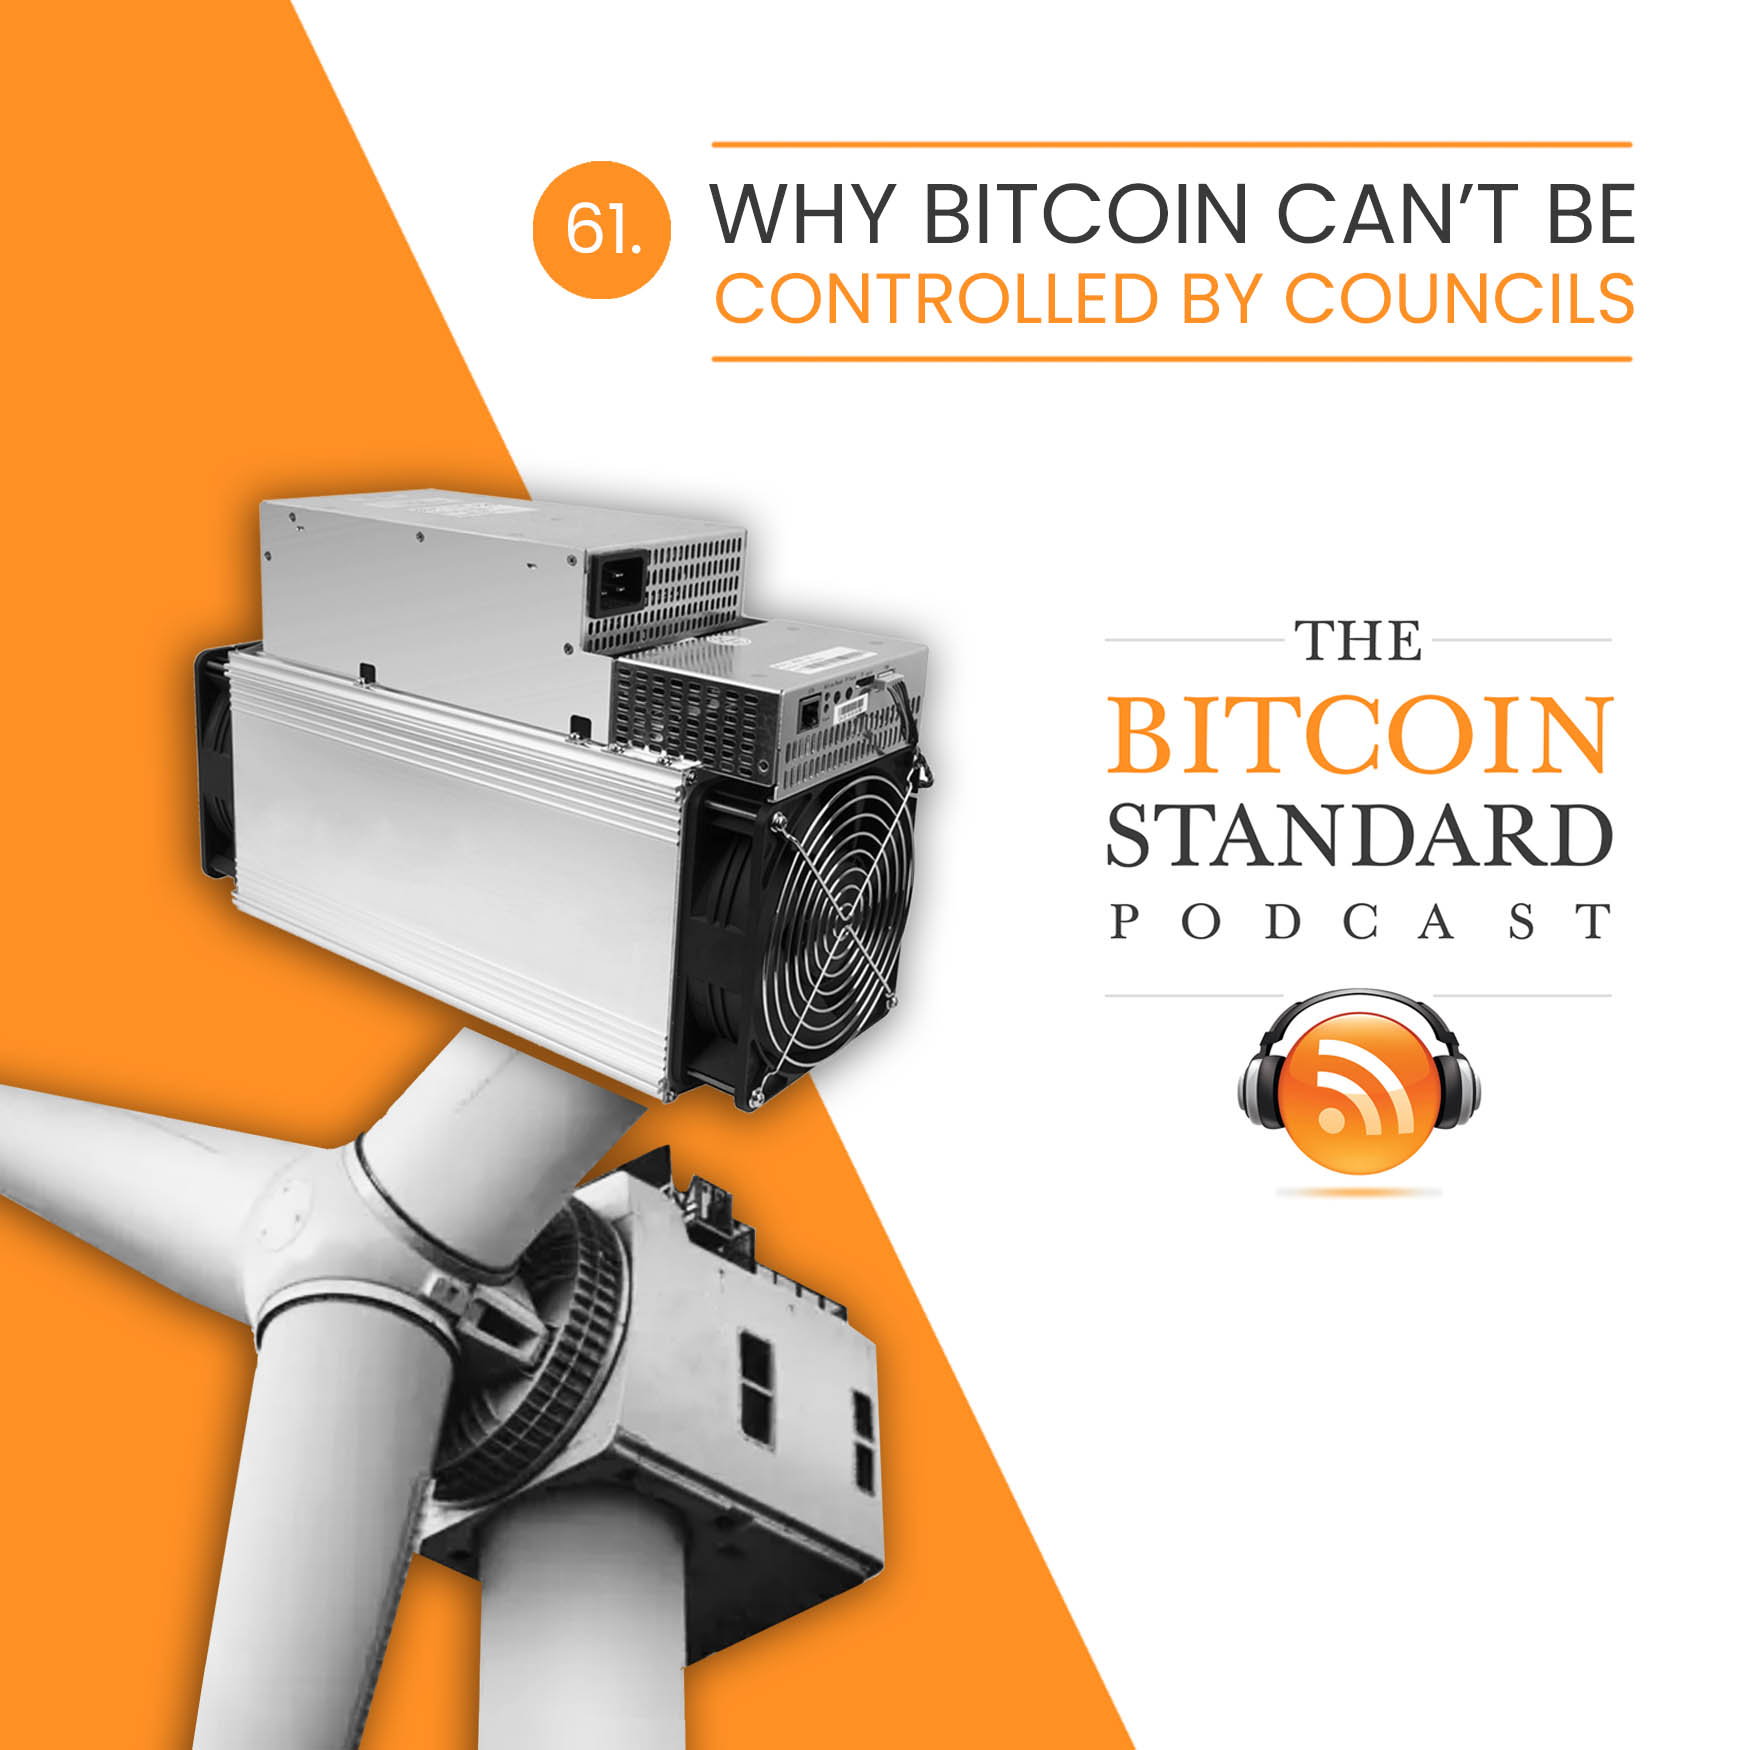 61. Why bitcoin can’t be controlled by councils